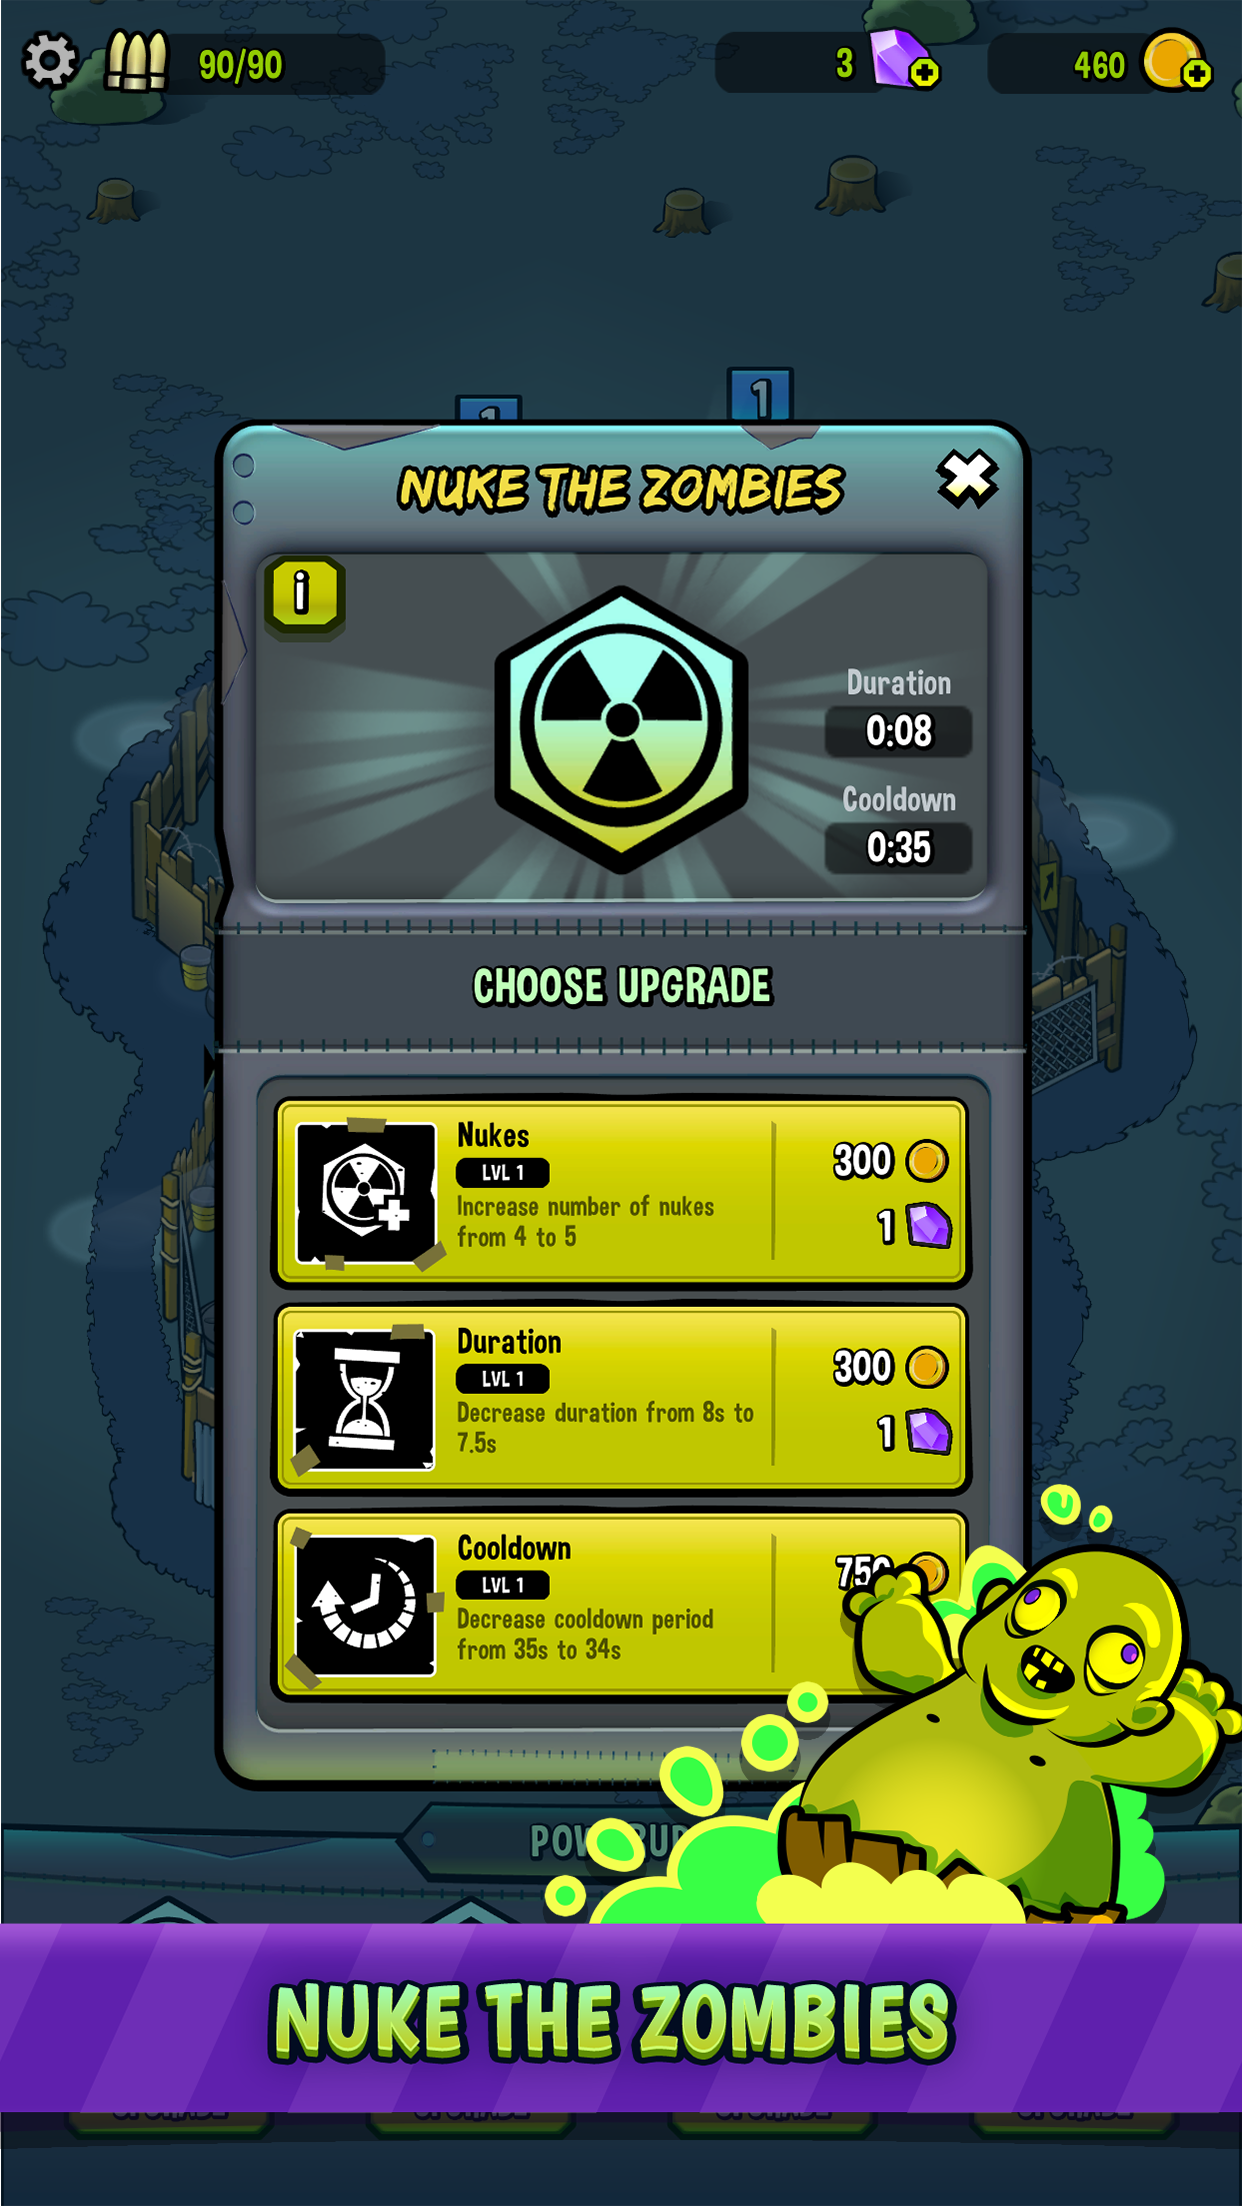 Nuke or EMP the zombies - our last defense option